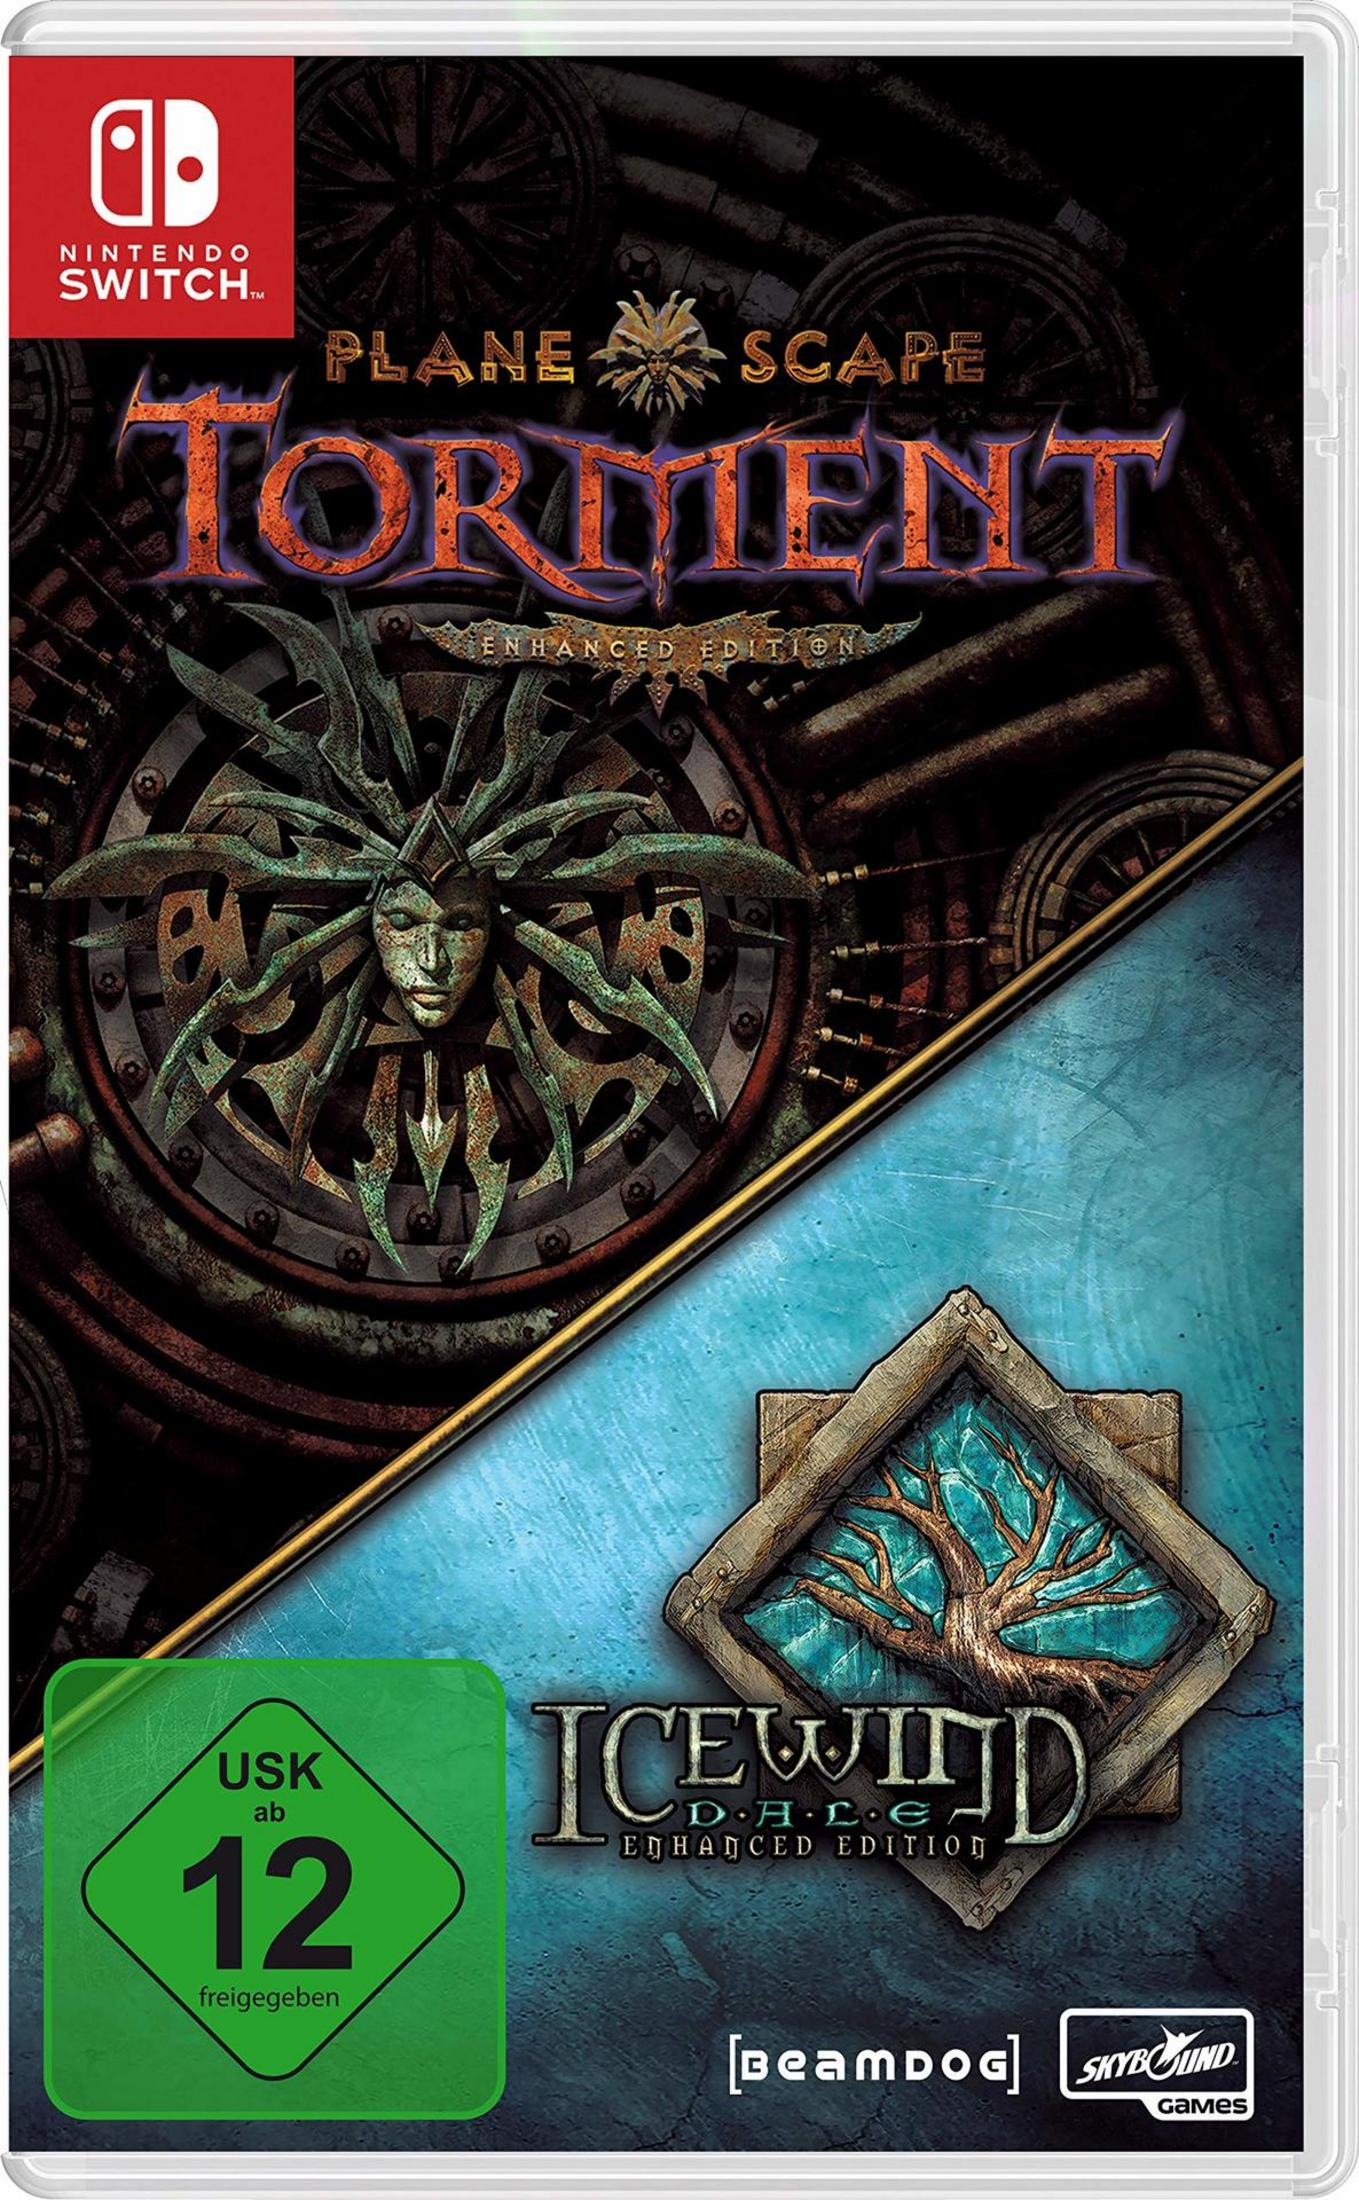 Torment & Enhanced Switch] - Planescape: [Nintendo Icewind Edition Dale